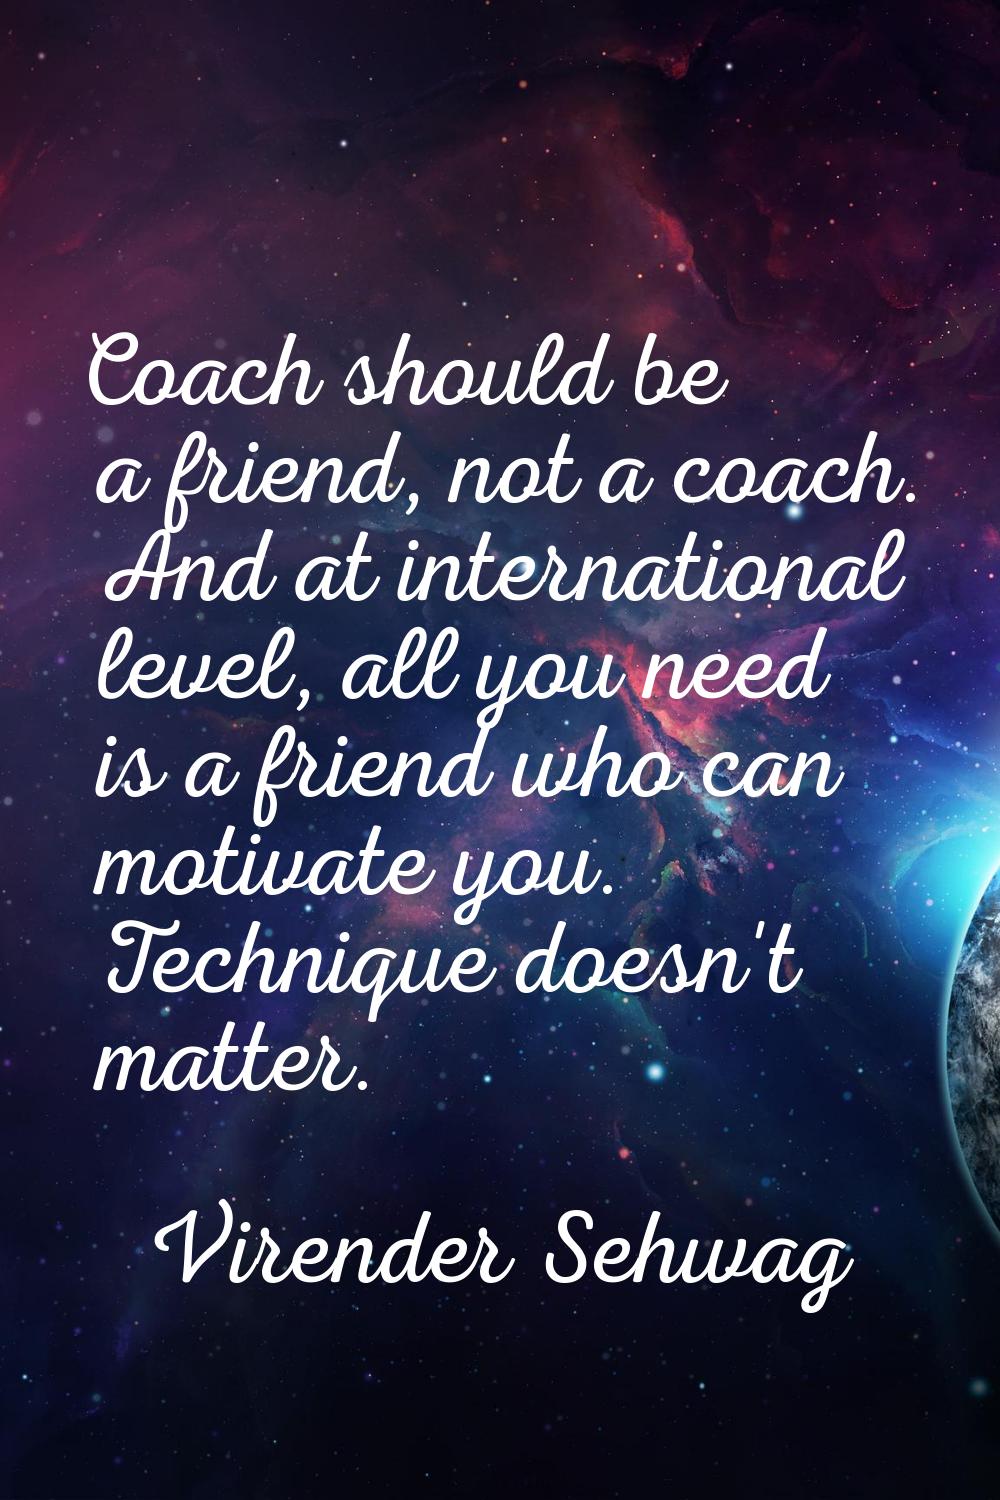 Coach should be a friend, not a coach. And at international level, all you need is a friend who can